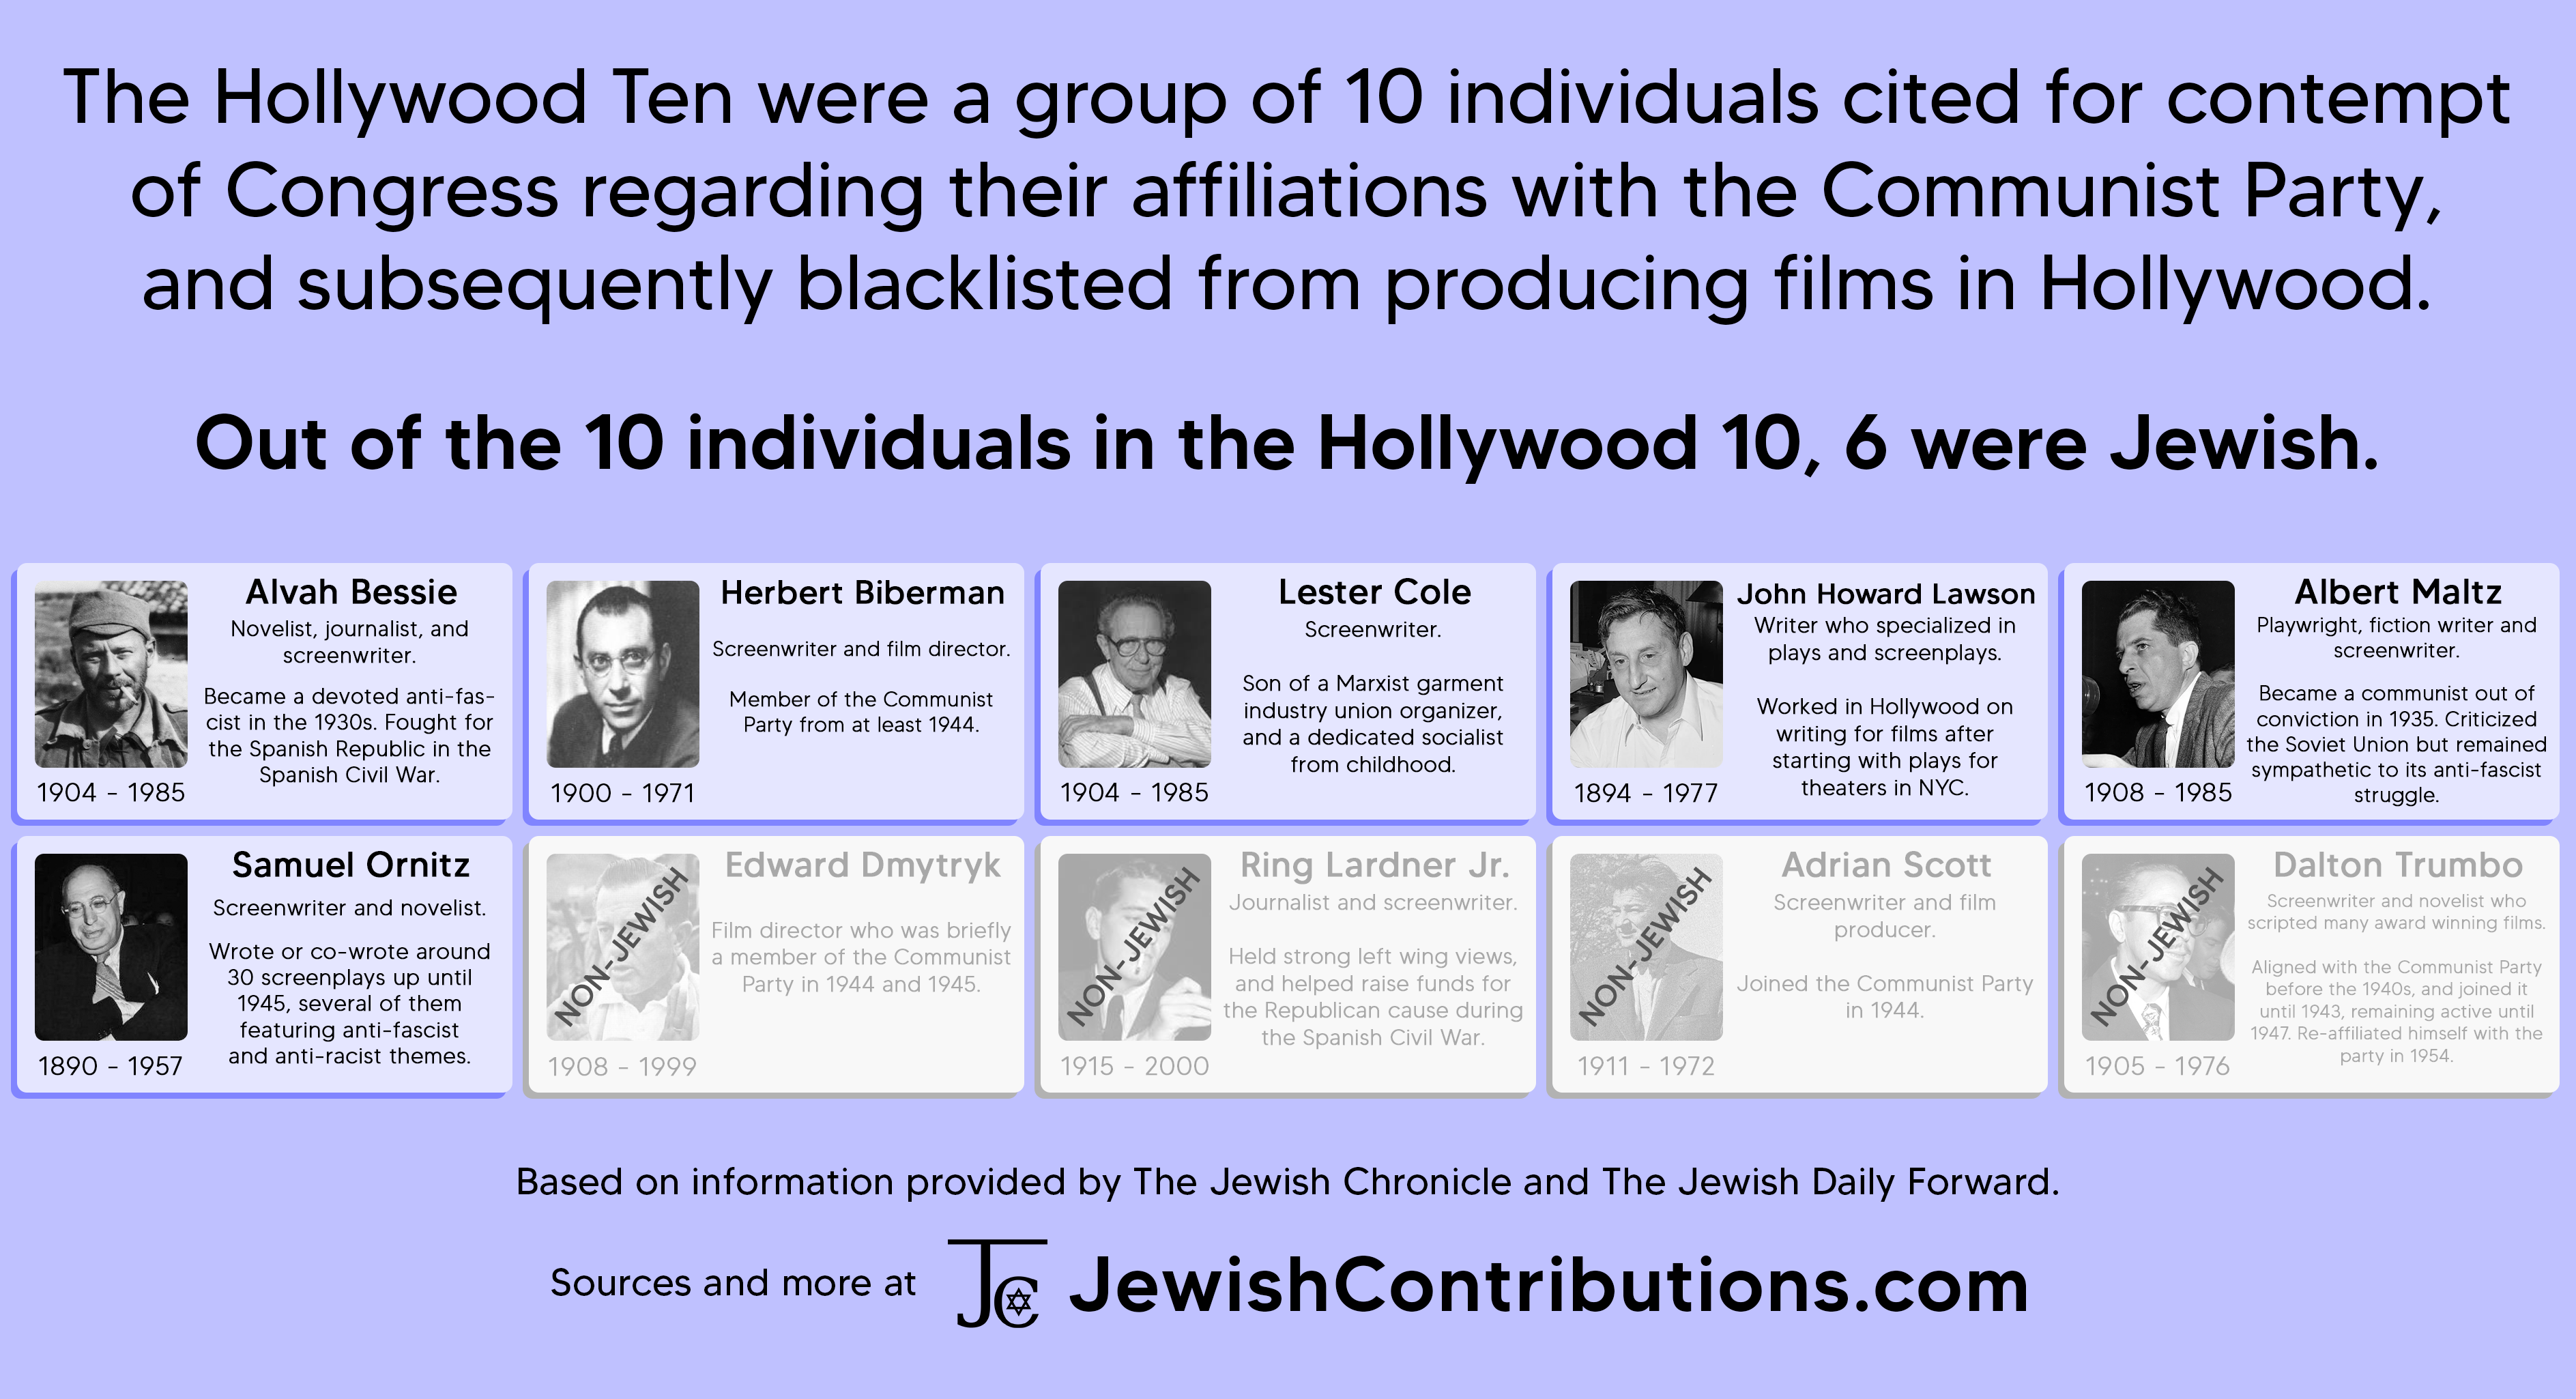 Out of the 10 individuals in the Hollywood 10, 6 were Jewish.